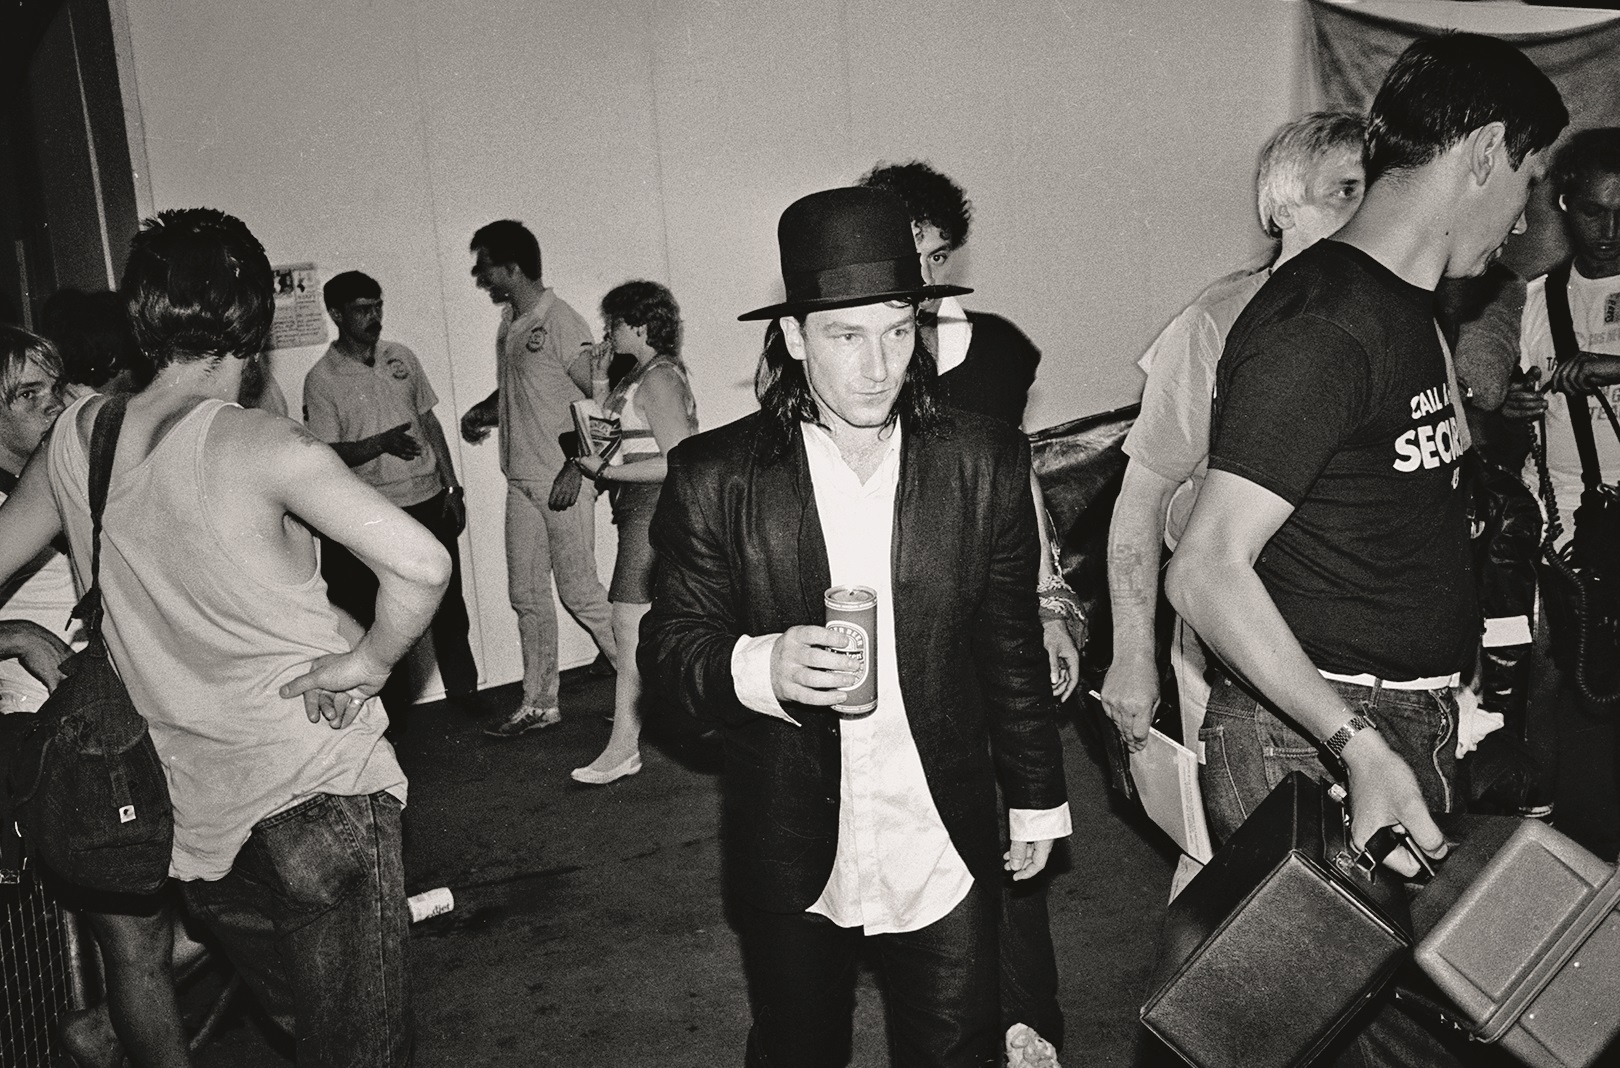 Irish singer Bono of U2 backstage at the Live Aid concert at Wembley Stadium, London, 13th July 1985. (Photo by Dave Hogan/Hulton Archive/Getty Images)